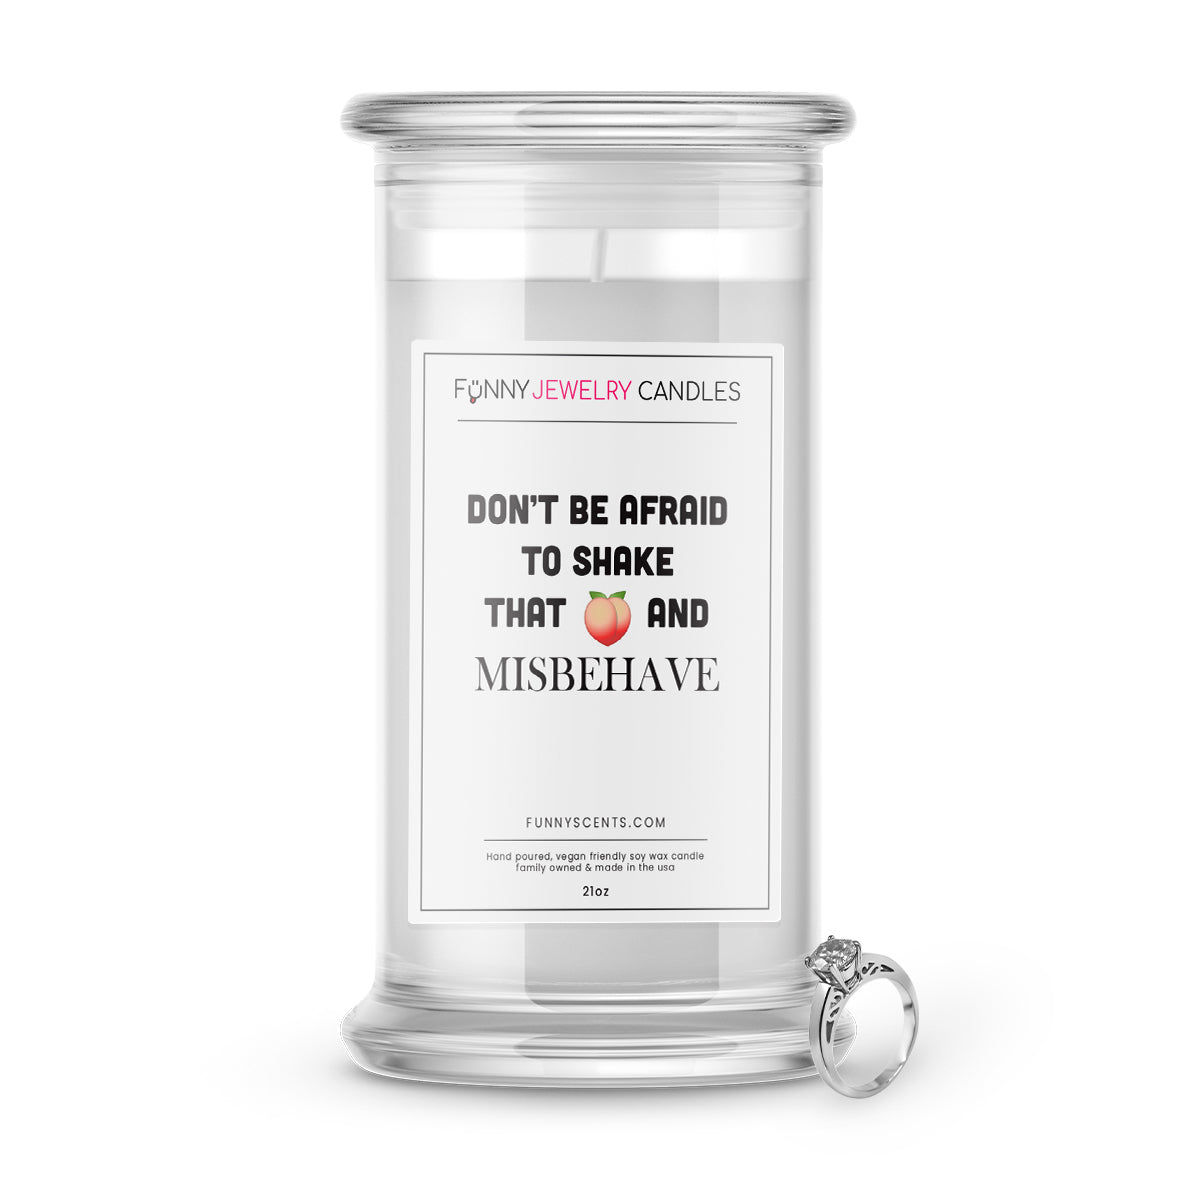 Don't be afraid to shake that butty and misbehave Jewelry Funny Candles